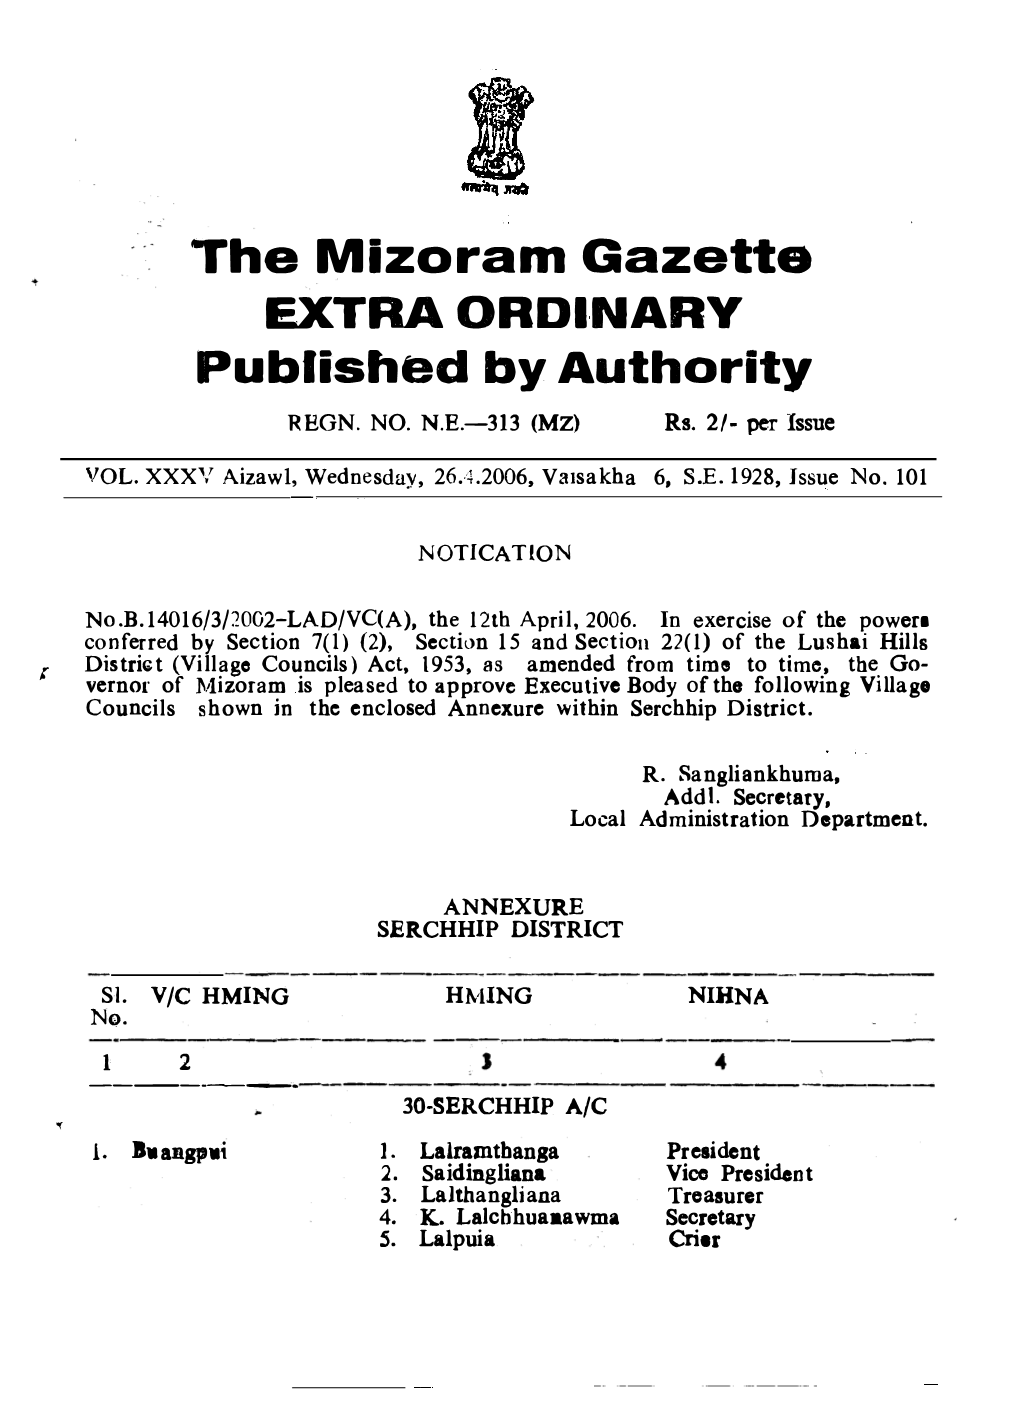 The Mizoral11 Gazette ORDINARY Published by Authority